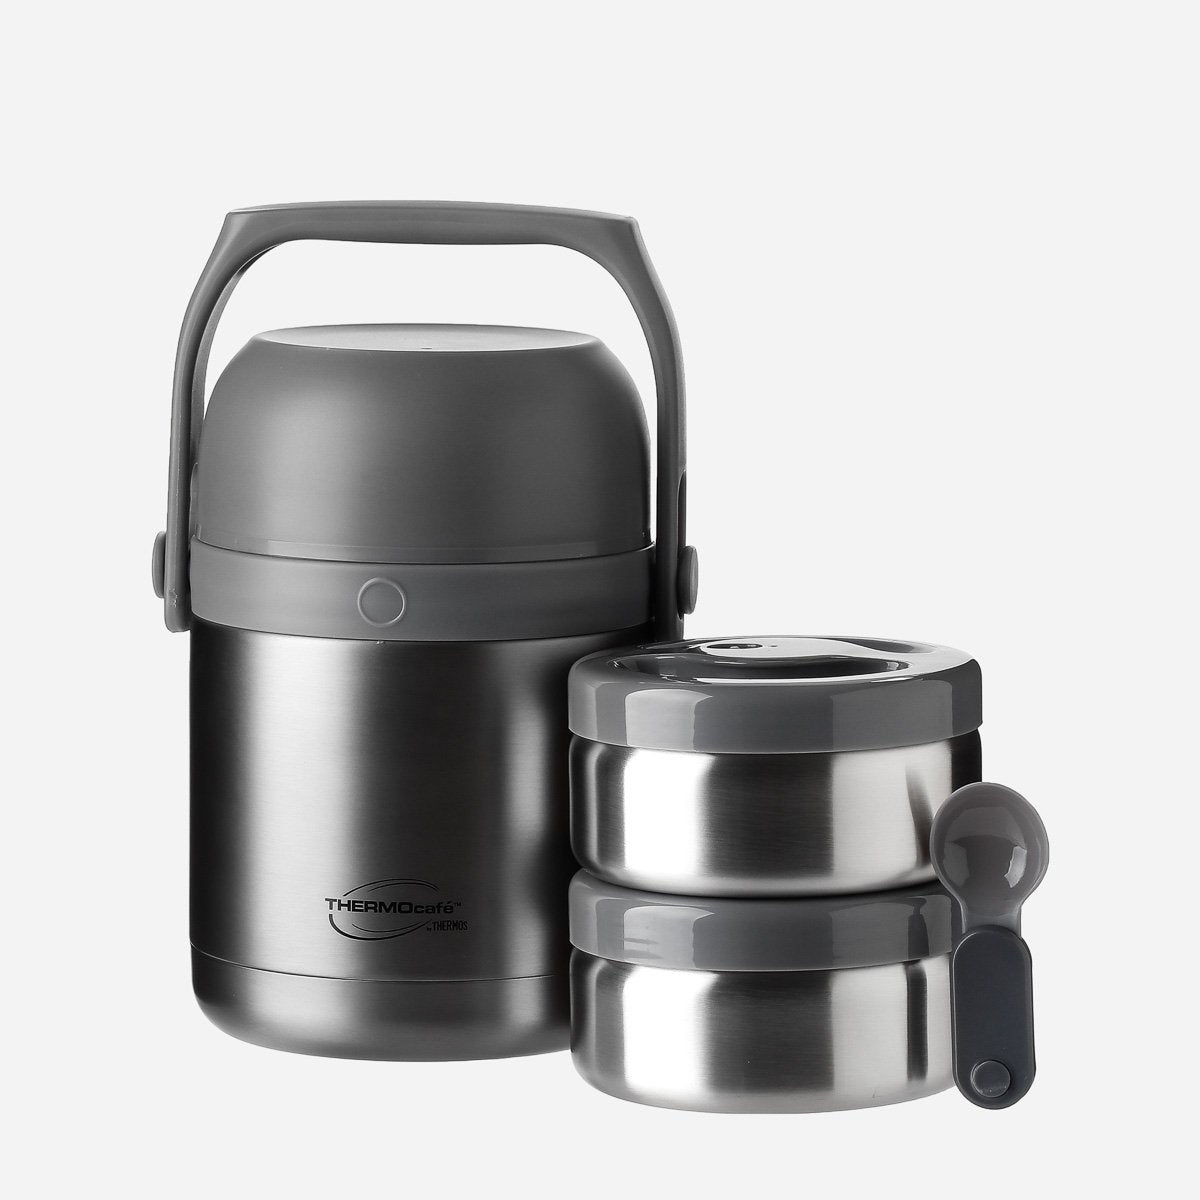 Thermos Vacuum Insulated Soup Lunch Set 400ml Black Gray JBY-801 BKGY New